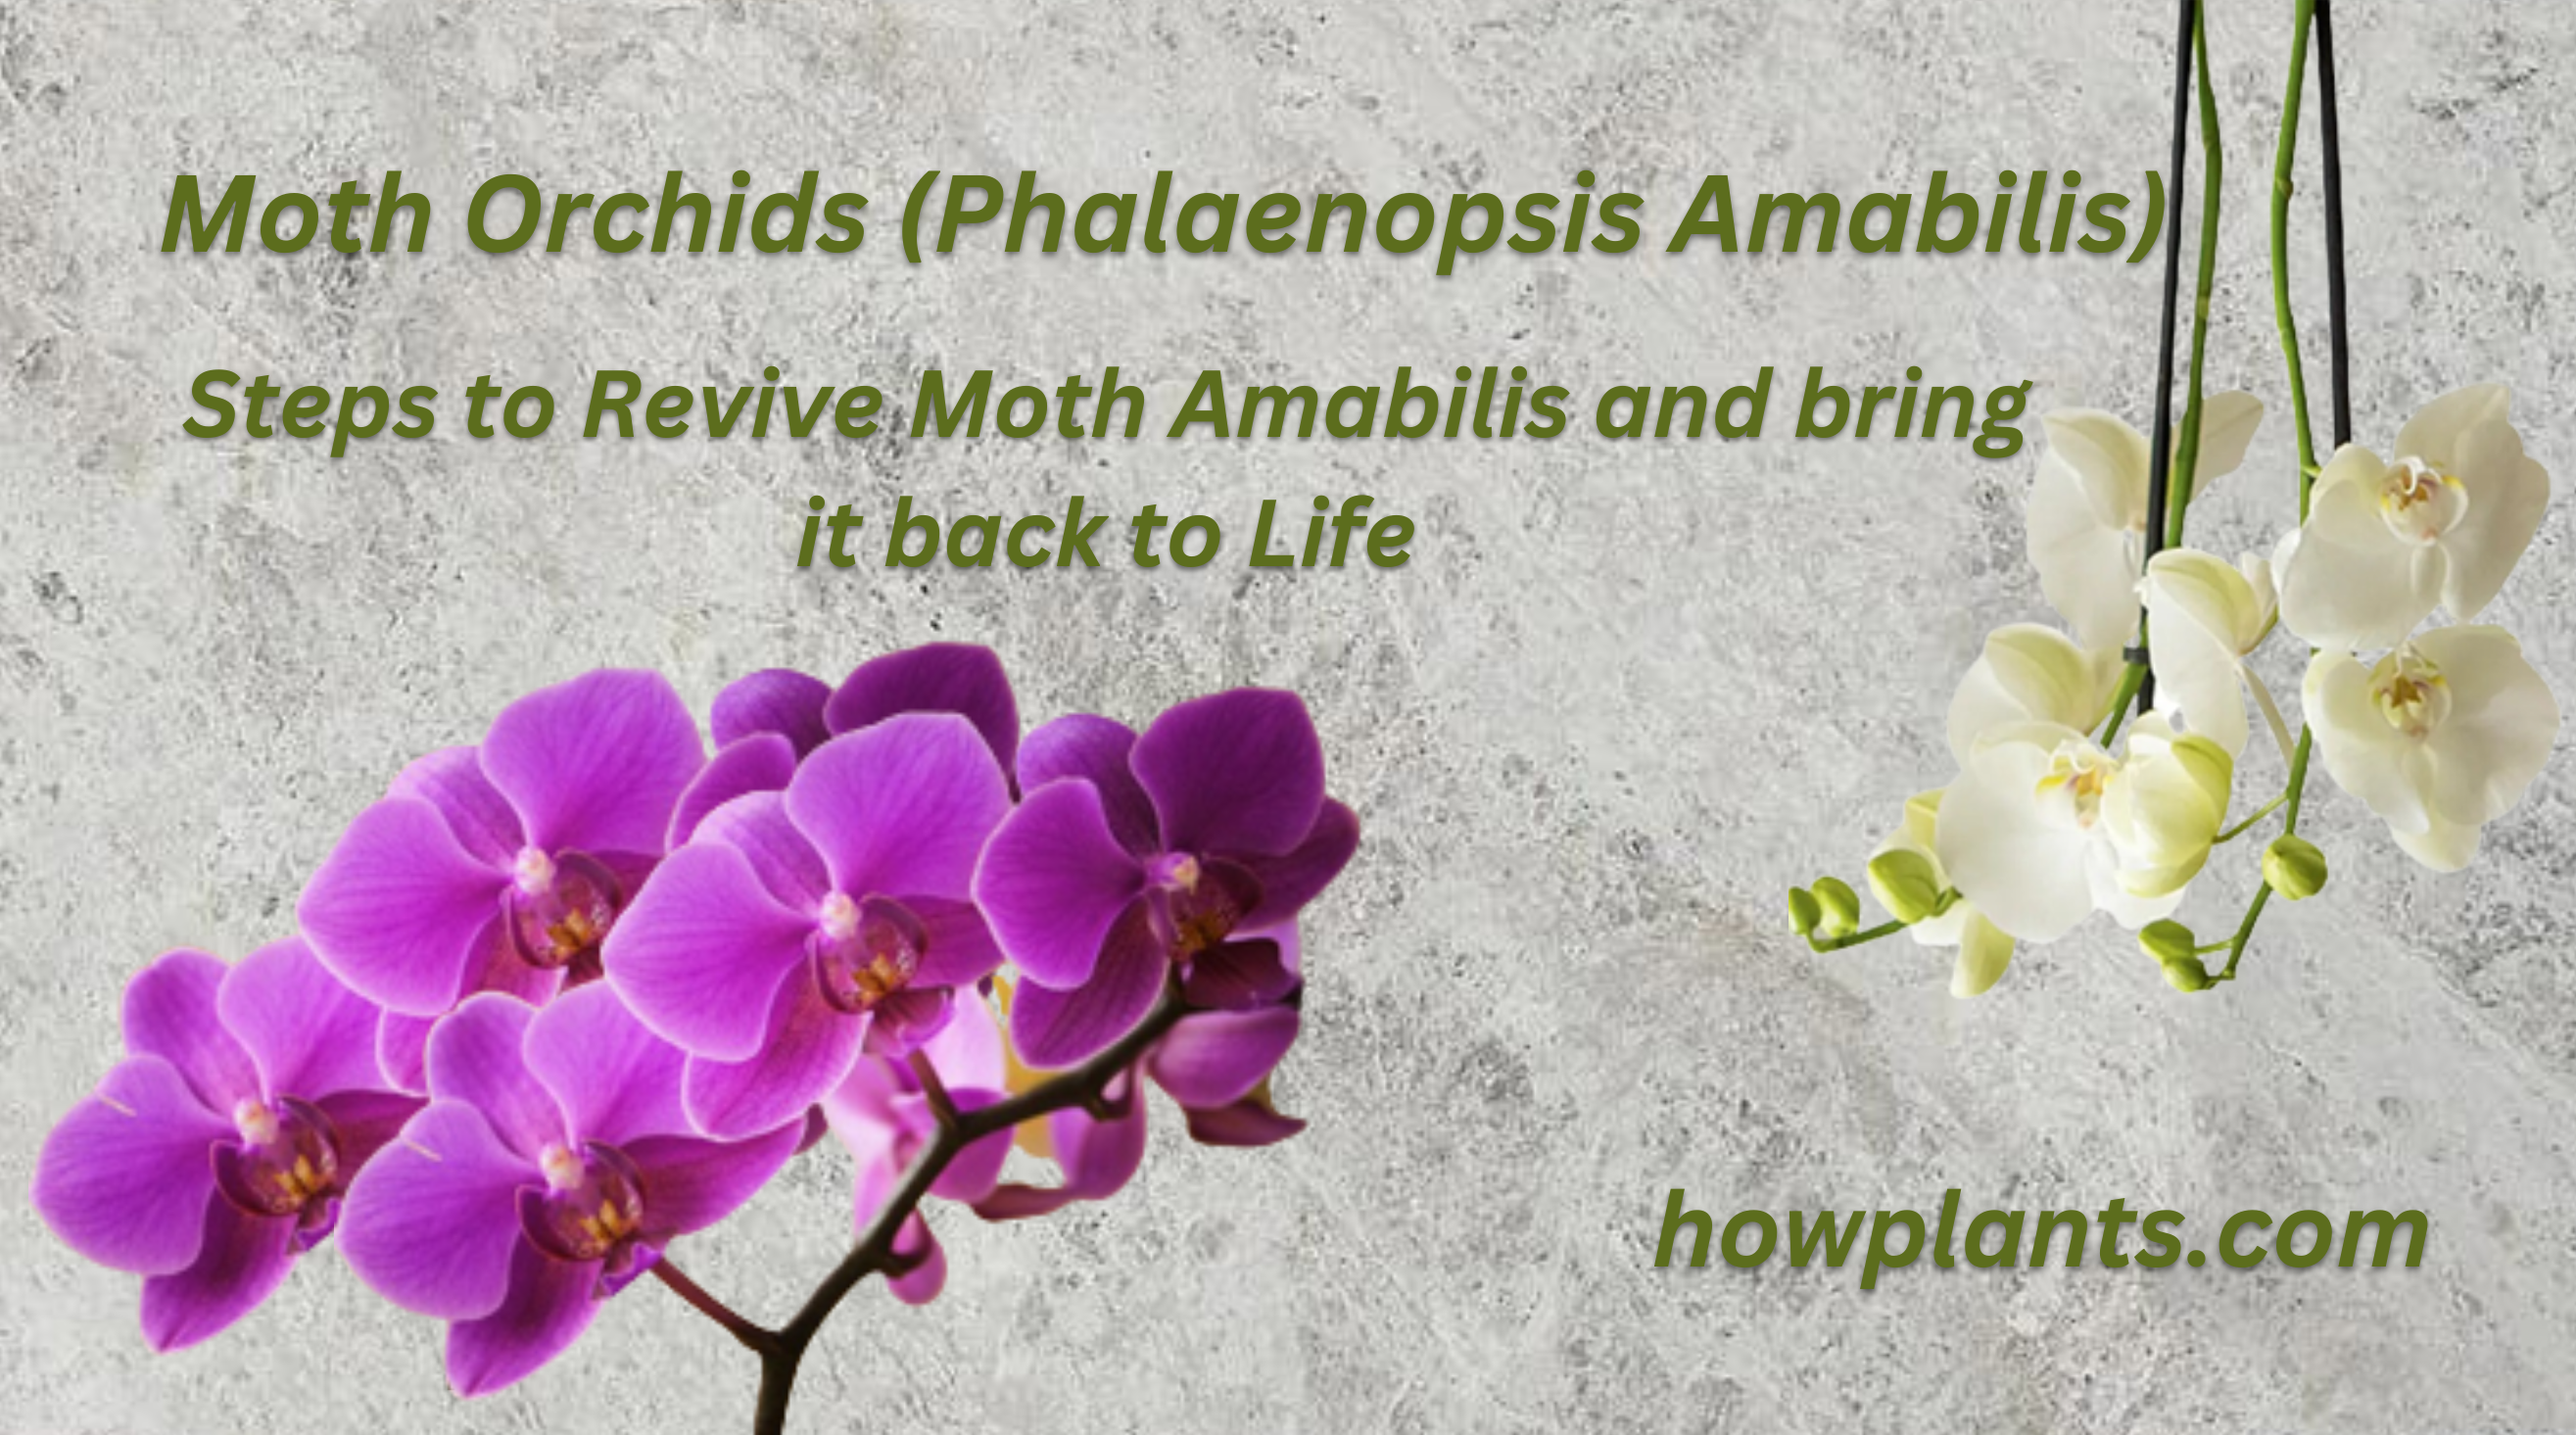 Steps to Revive Moth Amabilis and bring it back to Life